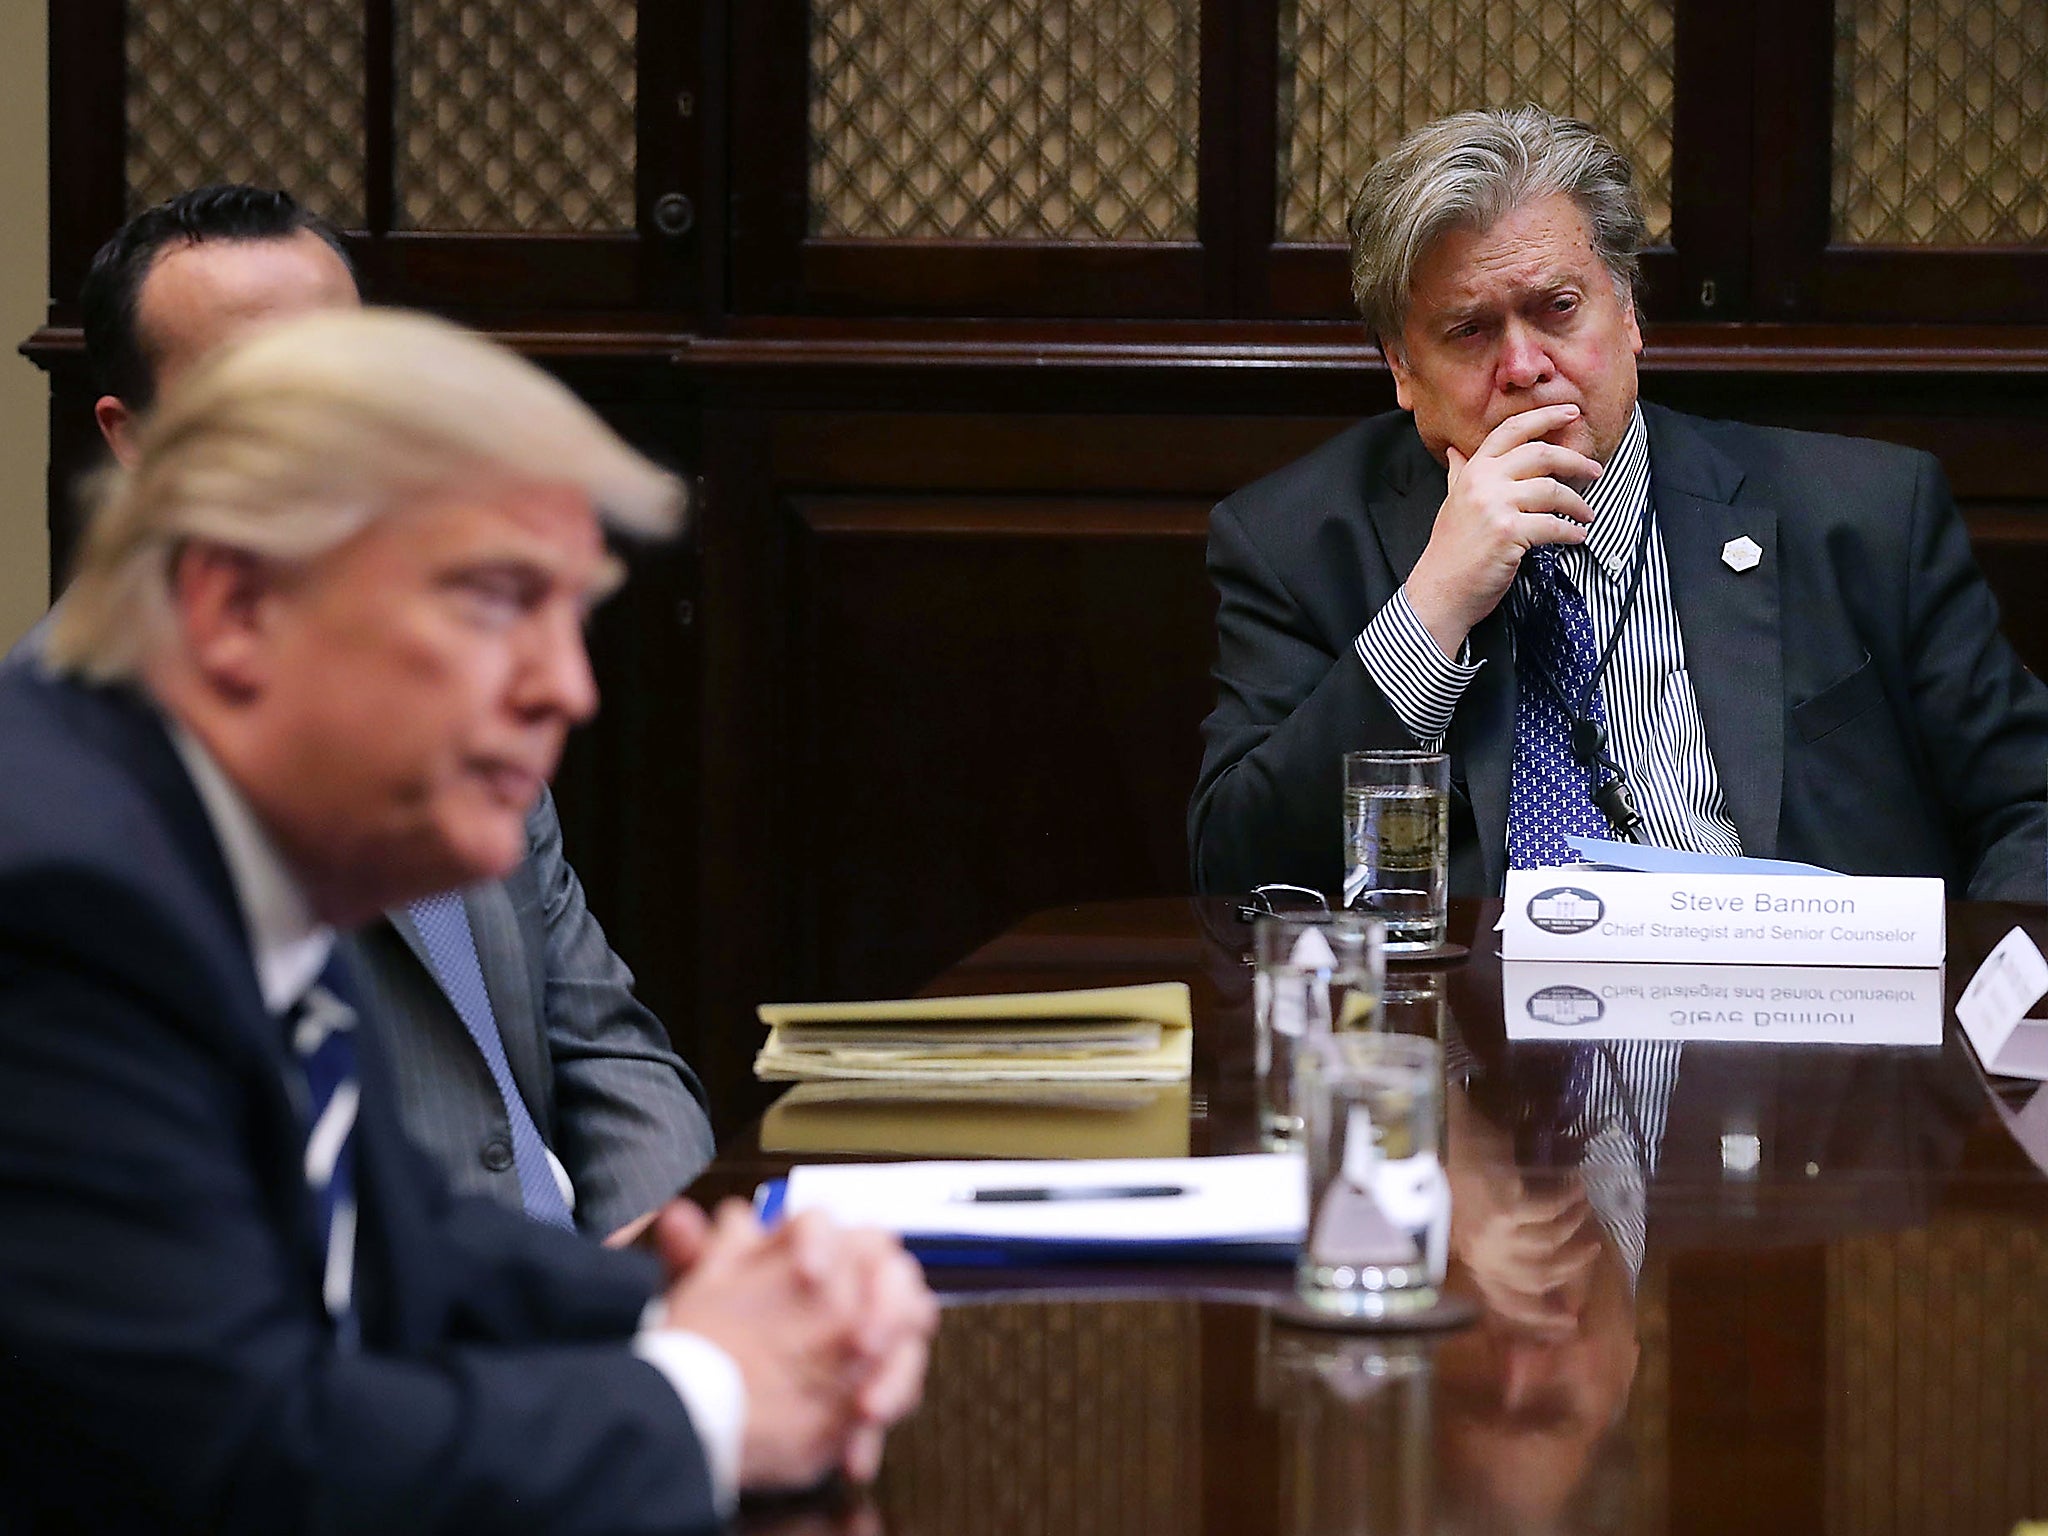 Bannon with President Trump in the White House in January